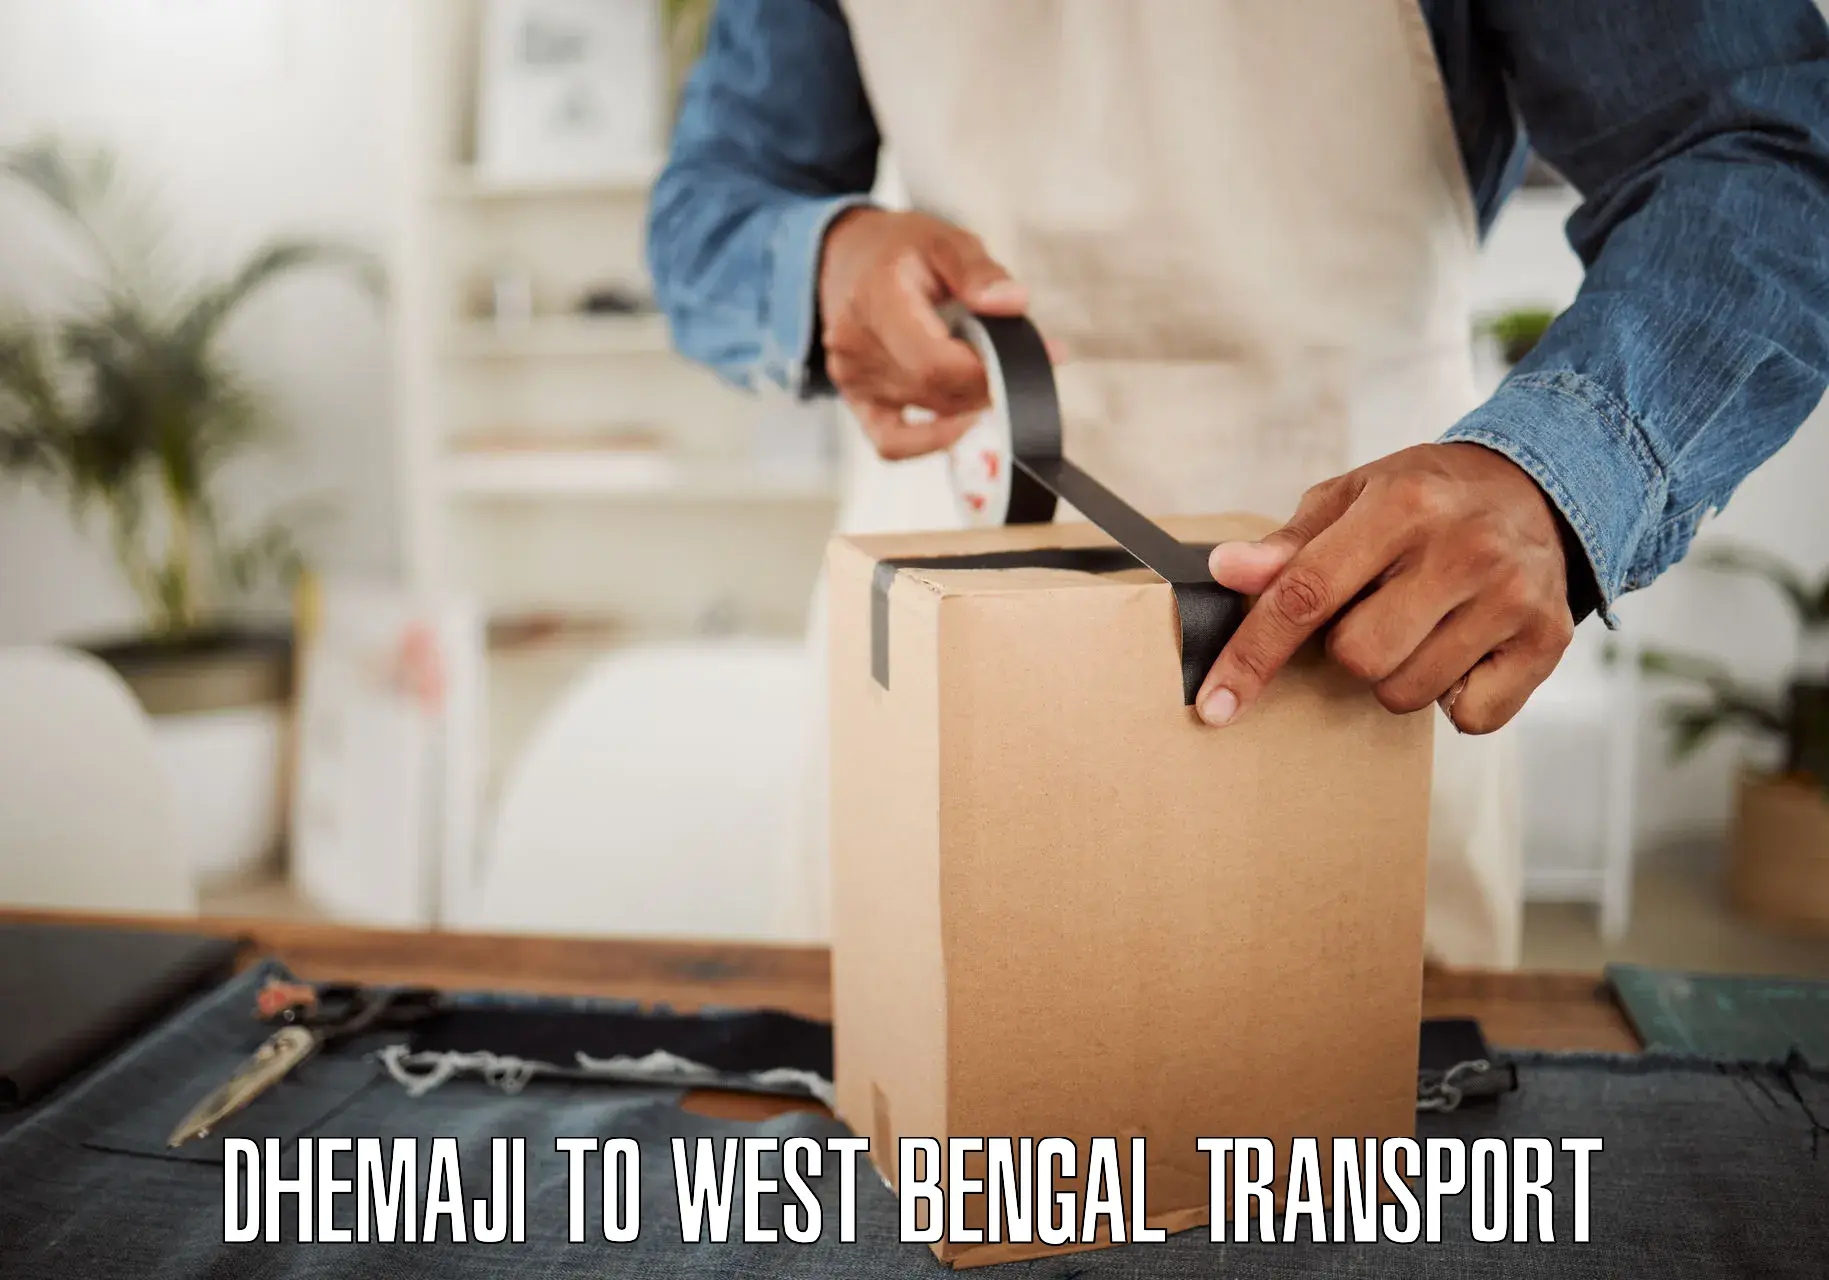 Parcel transport services in Dhemaji to Chandrakona Road